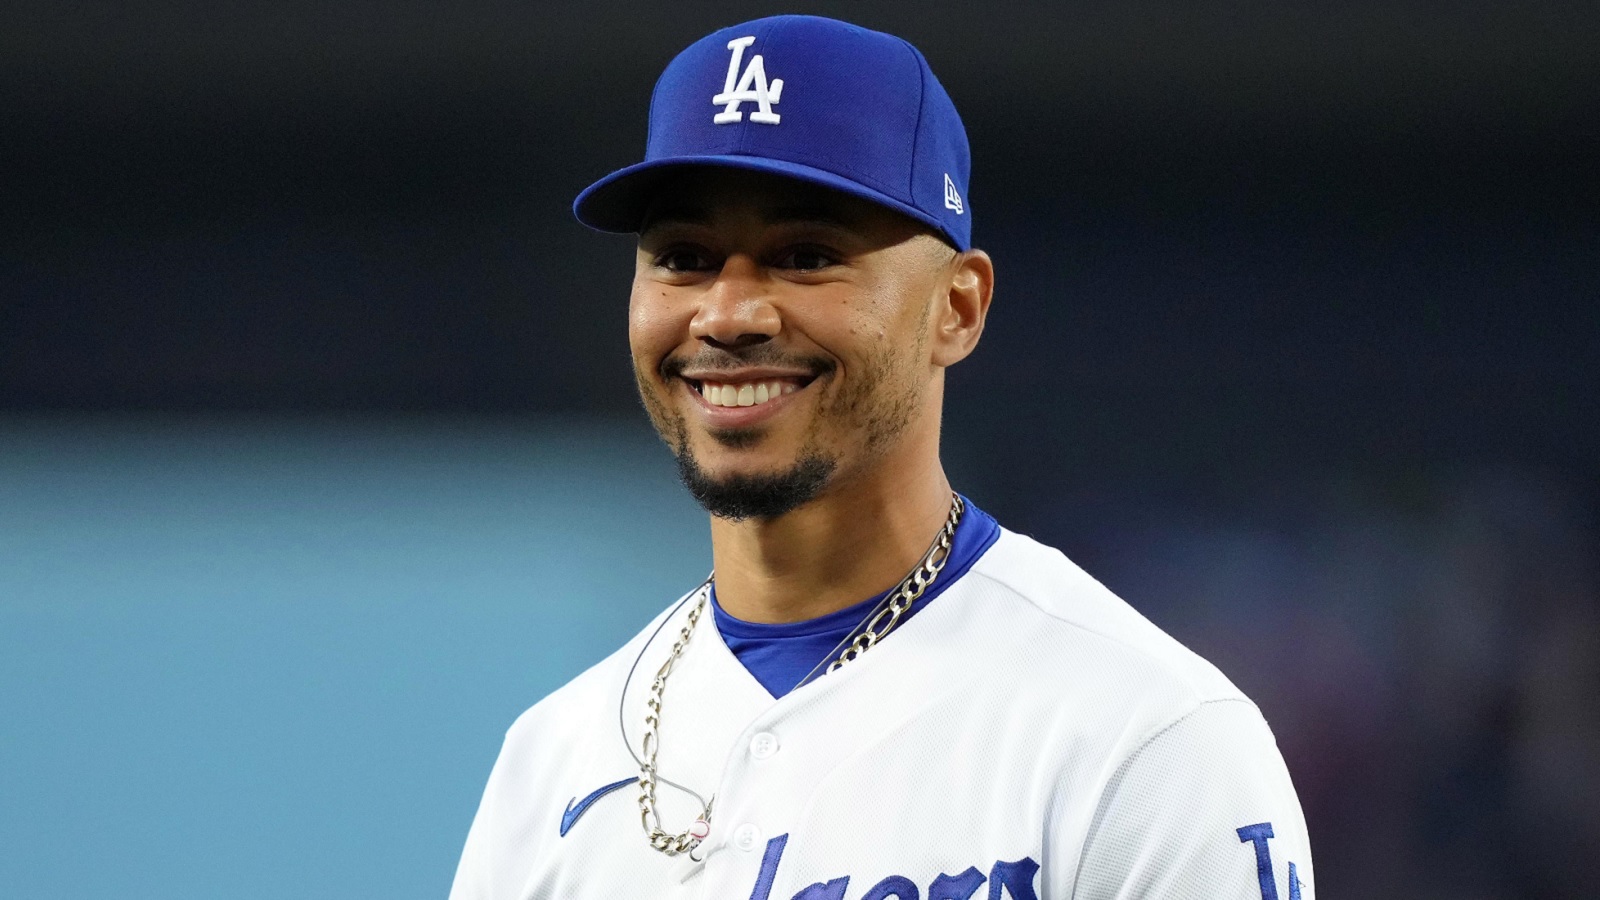 Pin by R S on Mookie Betts  Dodgers baseball, Dodgers nation, La dodgers  baseball